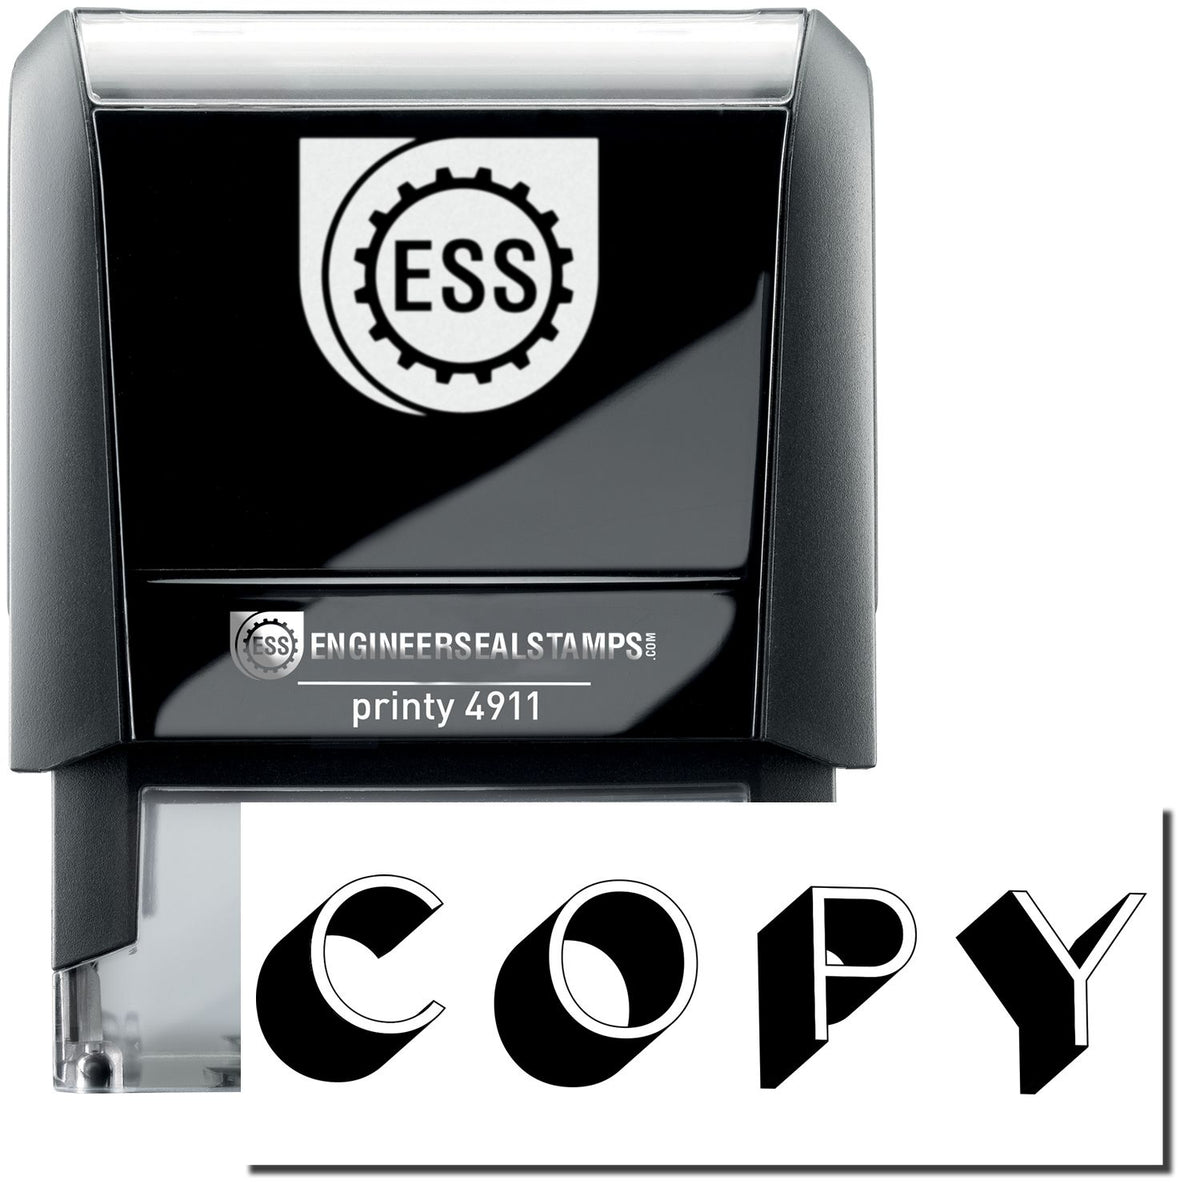 A self-inking stamp with a stamped image showing how the text &quot;COPY&quot; with a shadow behind the word is displayed after stamping.